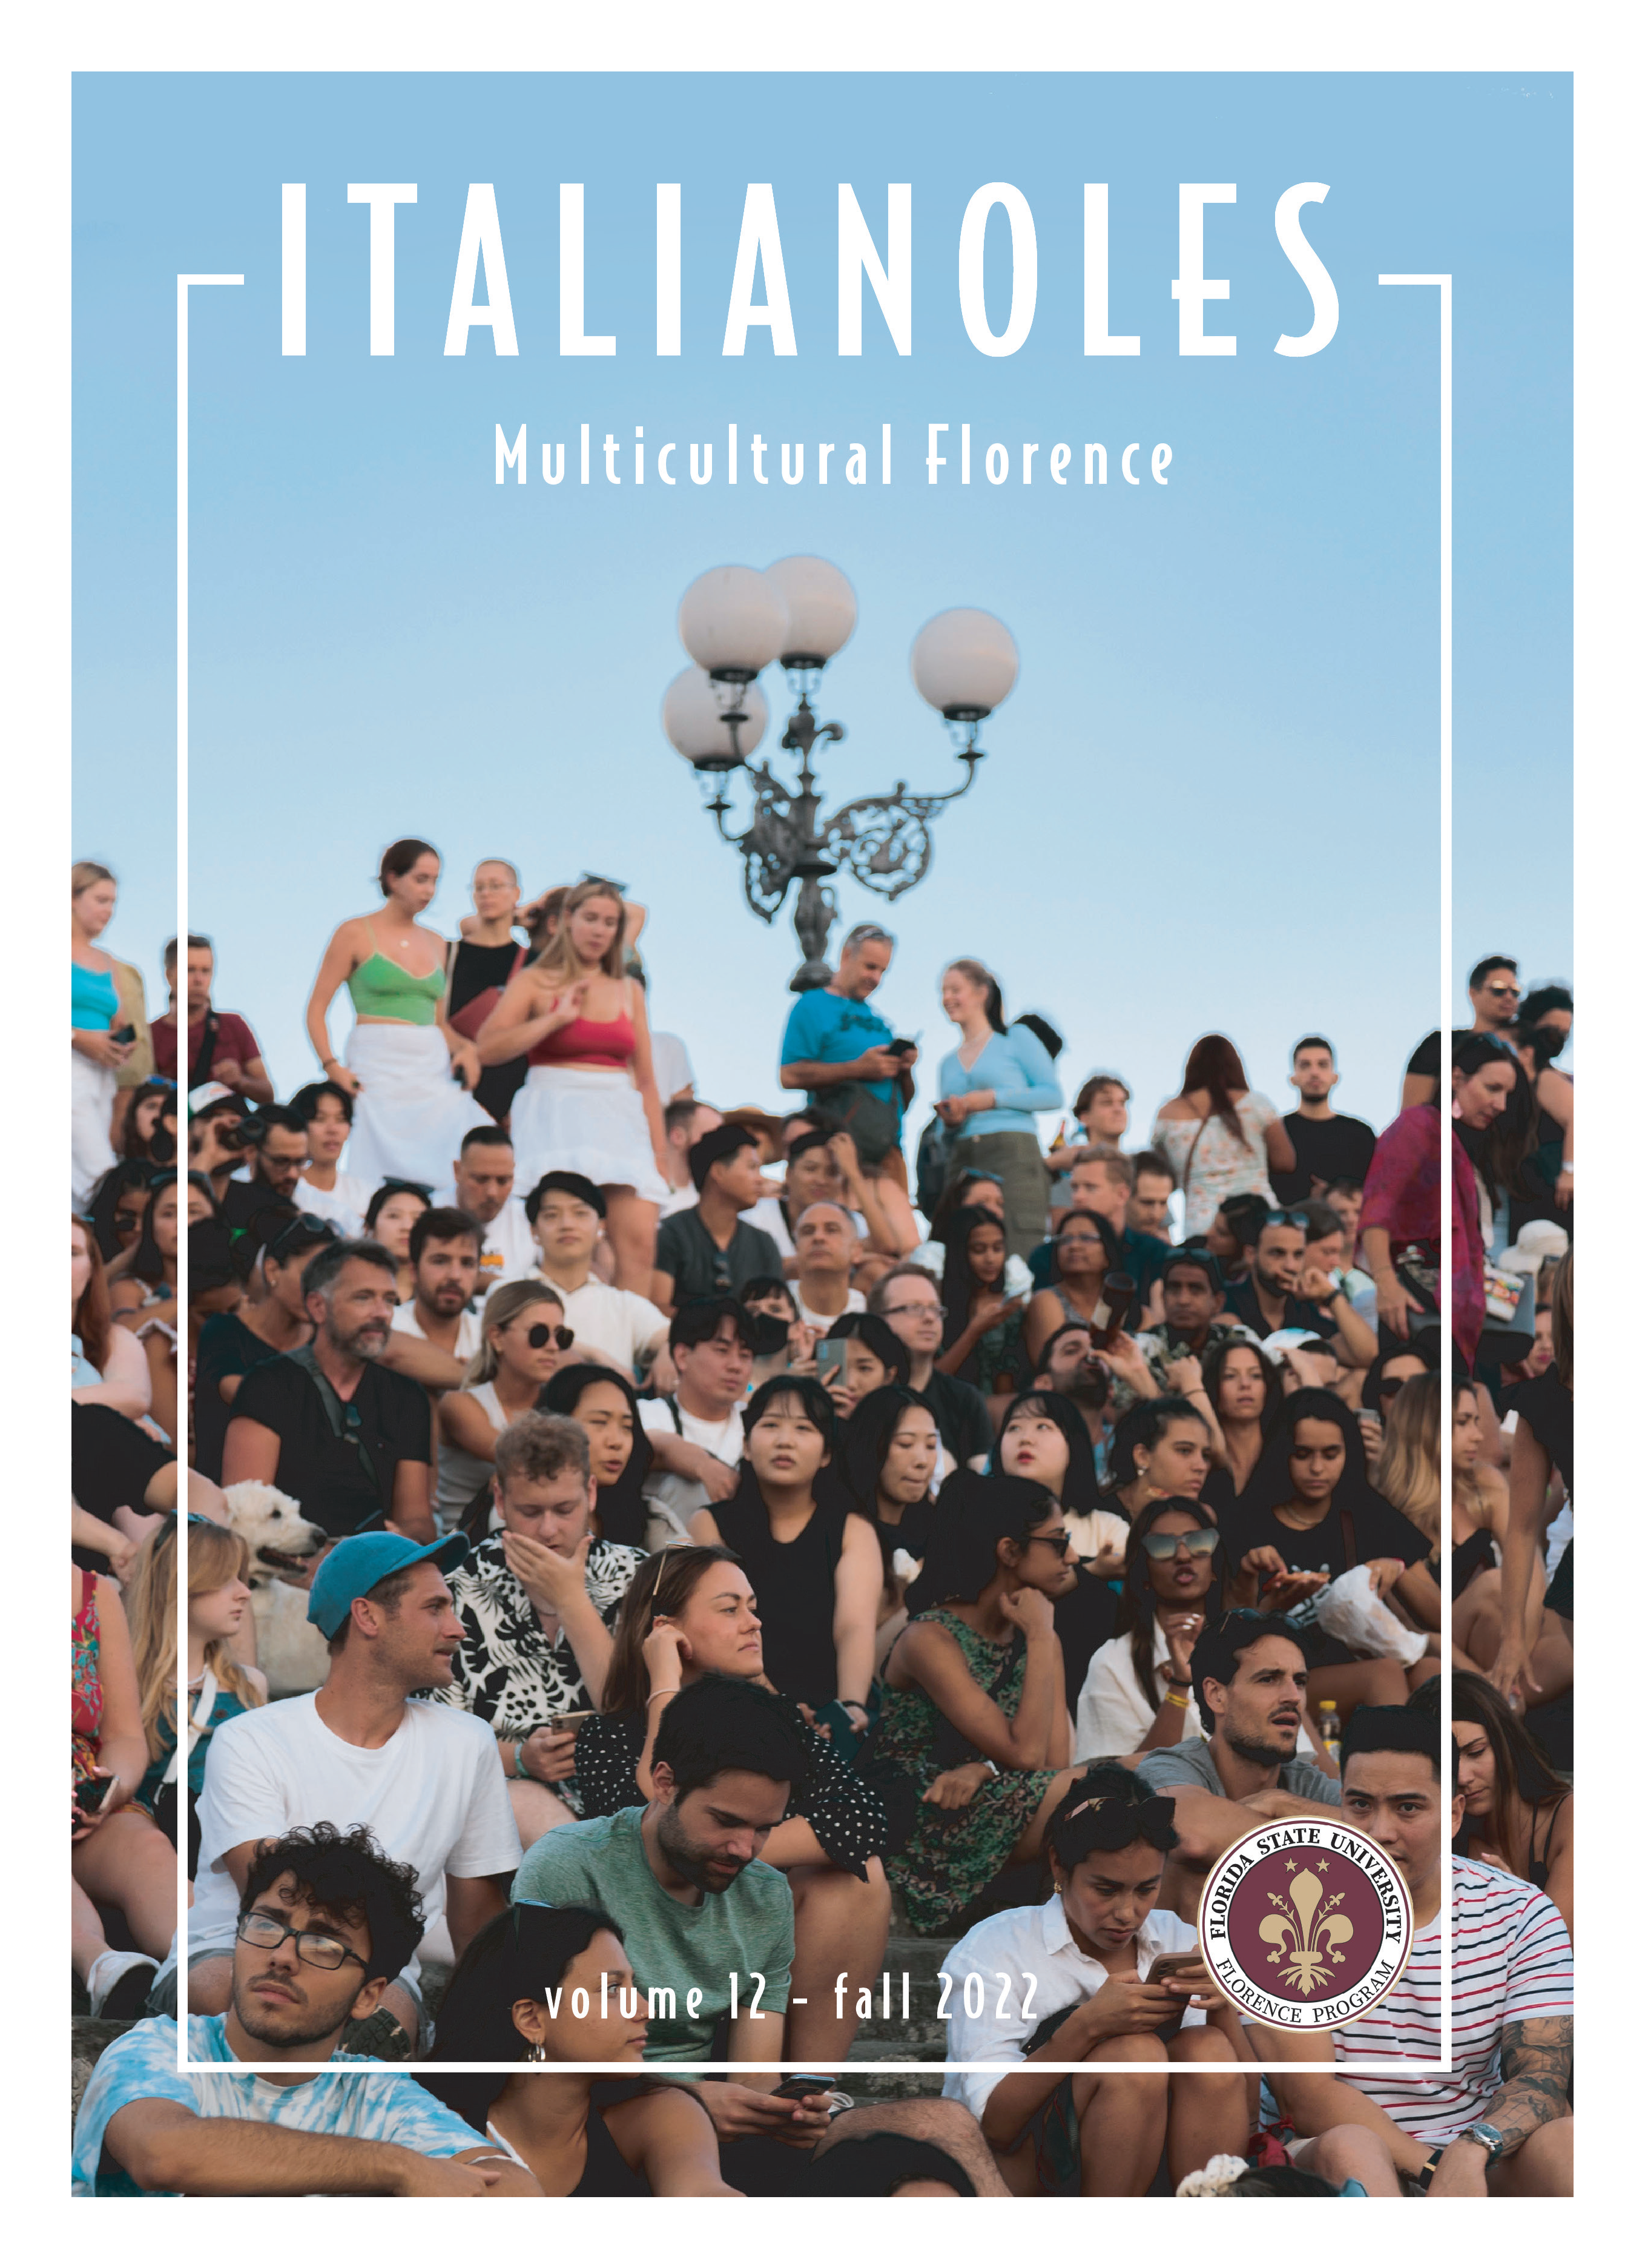 Cover for Italianoles volume 12, for fall 2022 with the subtitle Multicultural Florence. A large group of diverse men and women sit below an ornate streetlamp and clear blue sky